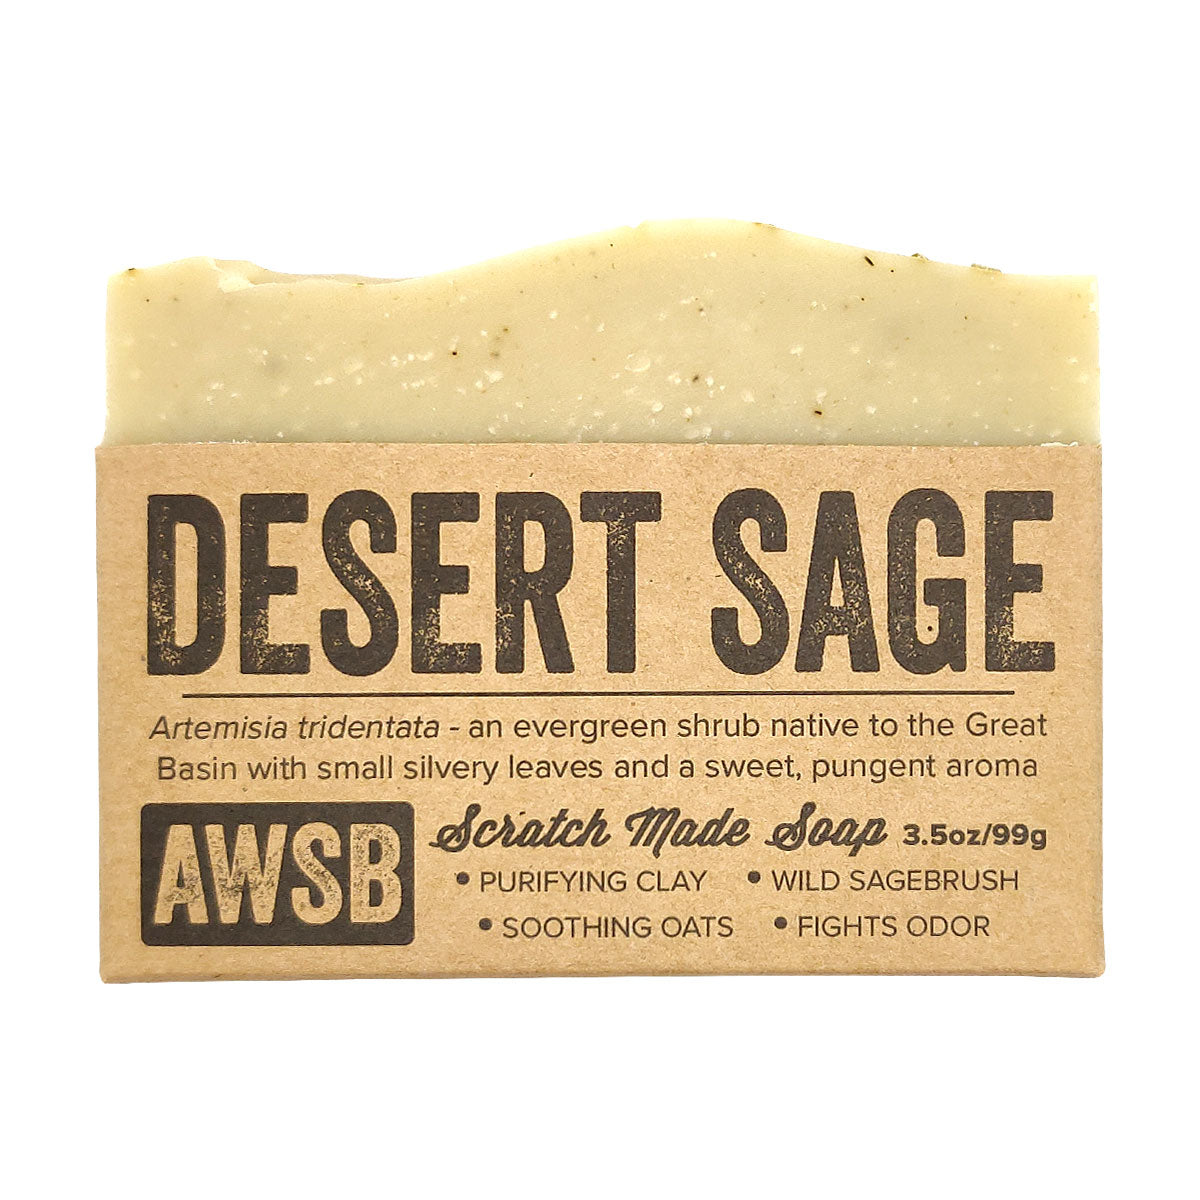 Natural Desert Sage Soap for sale, Essential Oil Soap Bar, Clean Scent, Sustainable Skincare, Vegan Cruelty Free, Face And Body, Bath Beauty, Natural Gift